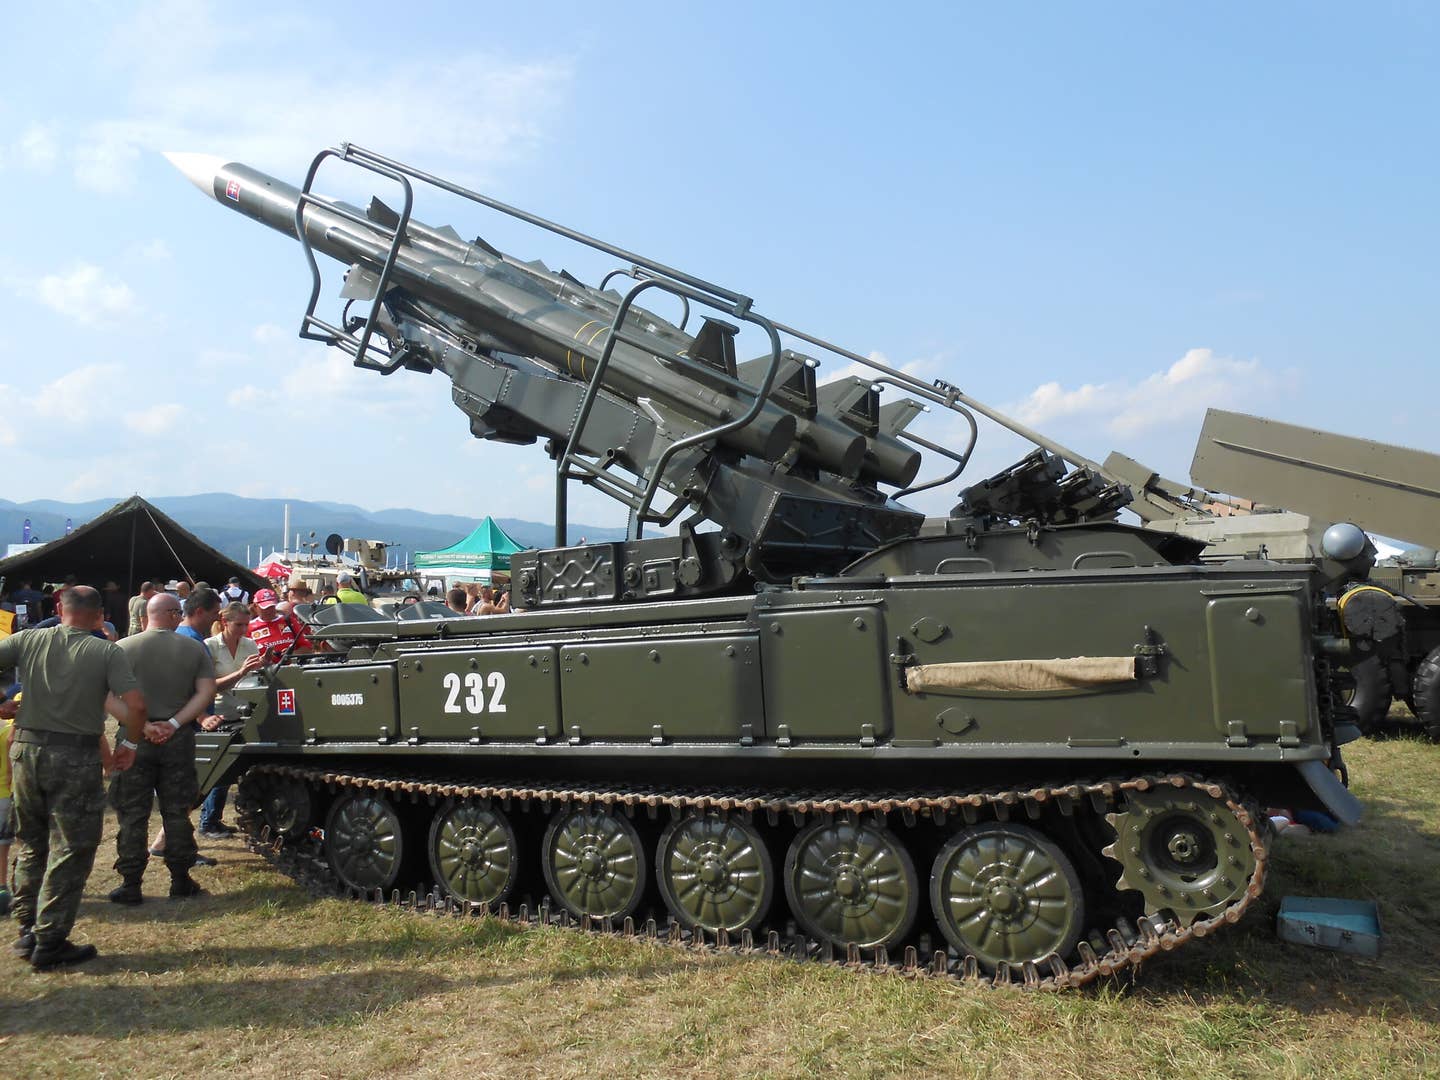 A Slovakian 2K12M2 Kub-M2 surface-to-air missile system. <em>Andrej-airliner/Wikimedia Commons</em>